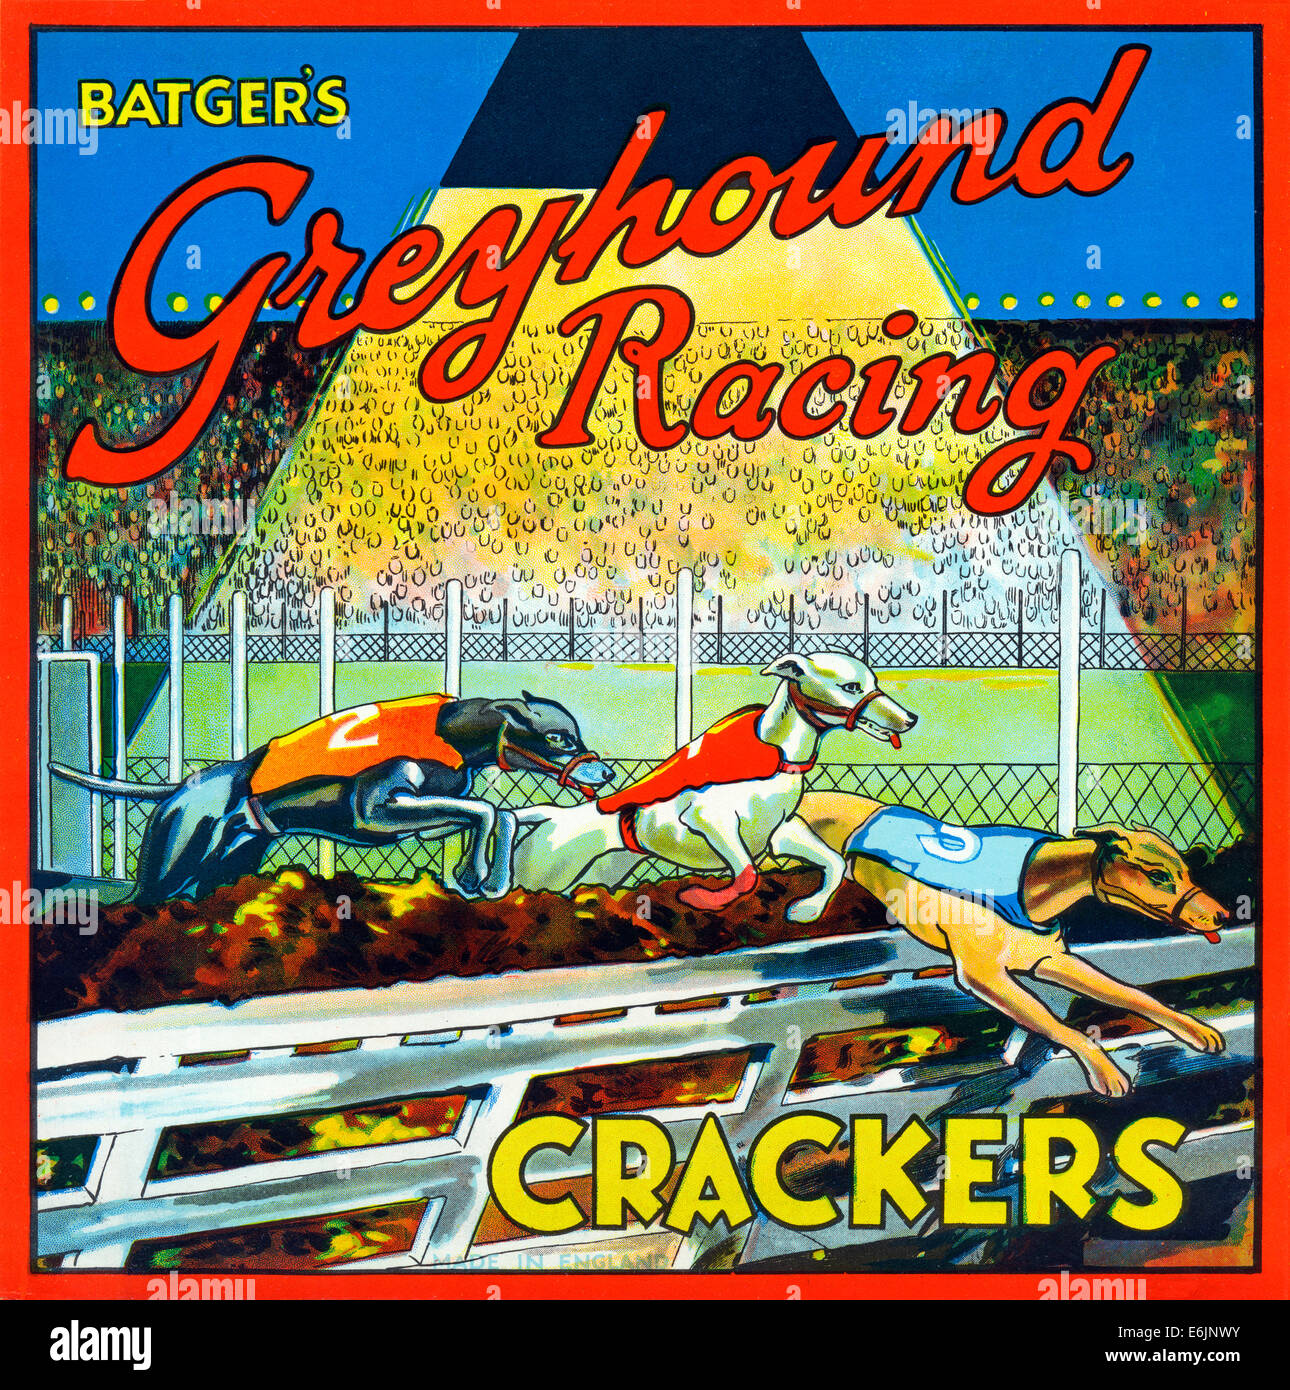 Batgers Greyhound Racing Crackers, 1930 label for a box from the London sweet and biscuit makers Stock Photo